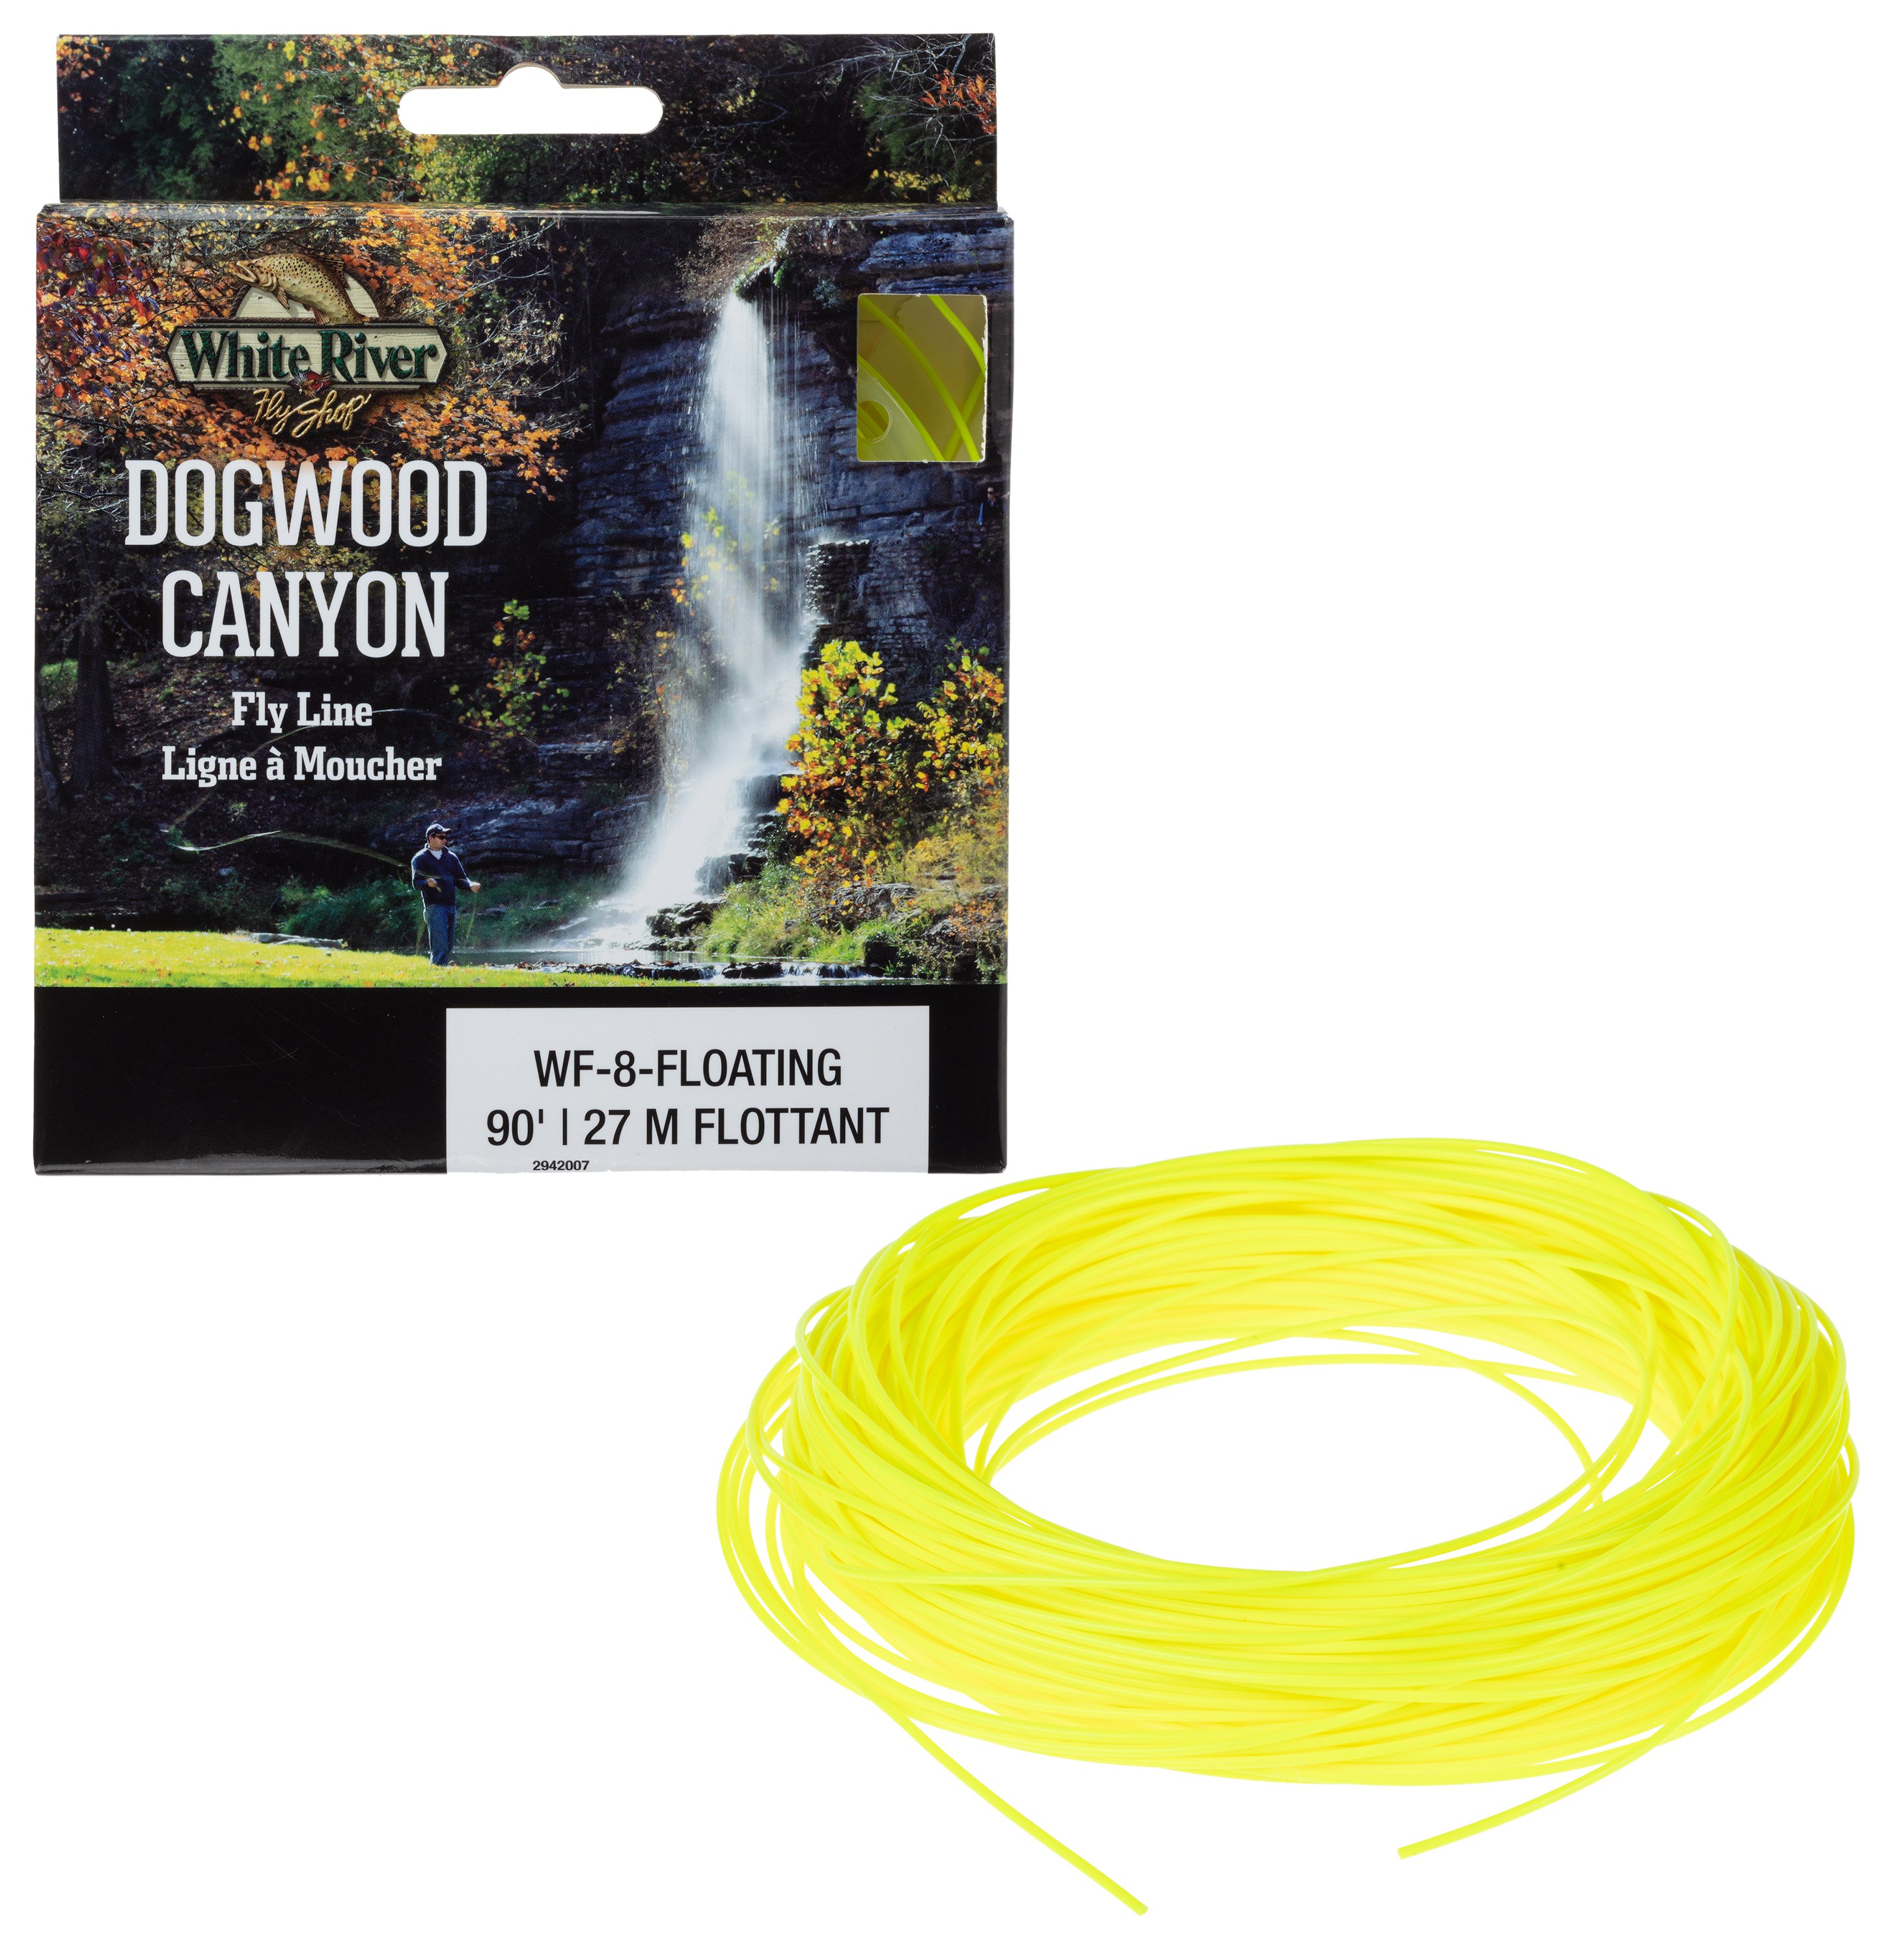 White River Fly Shop Dogwood Canyon Floating Fly Line - 6